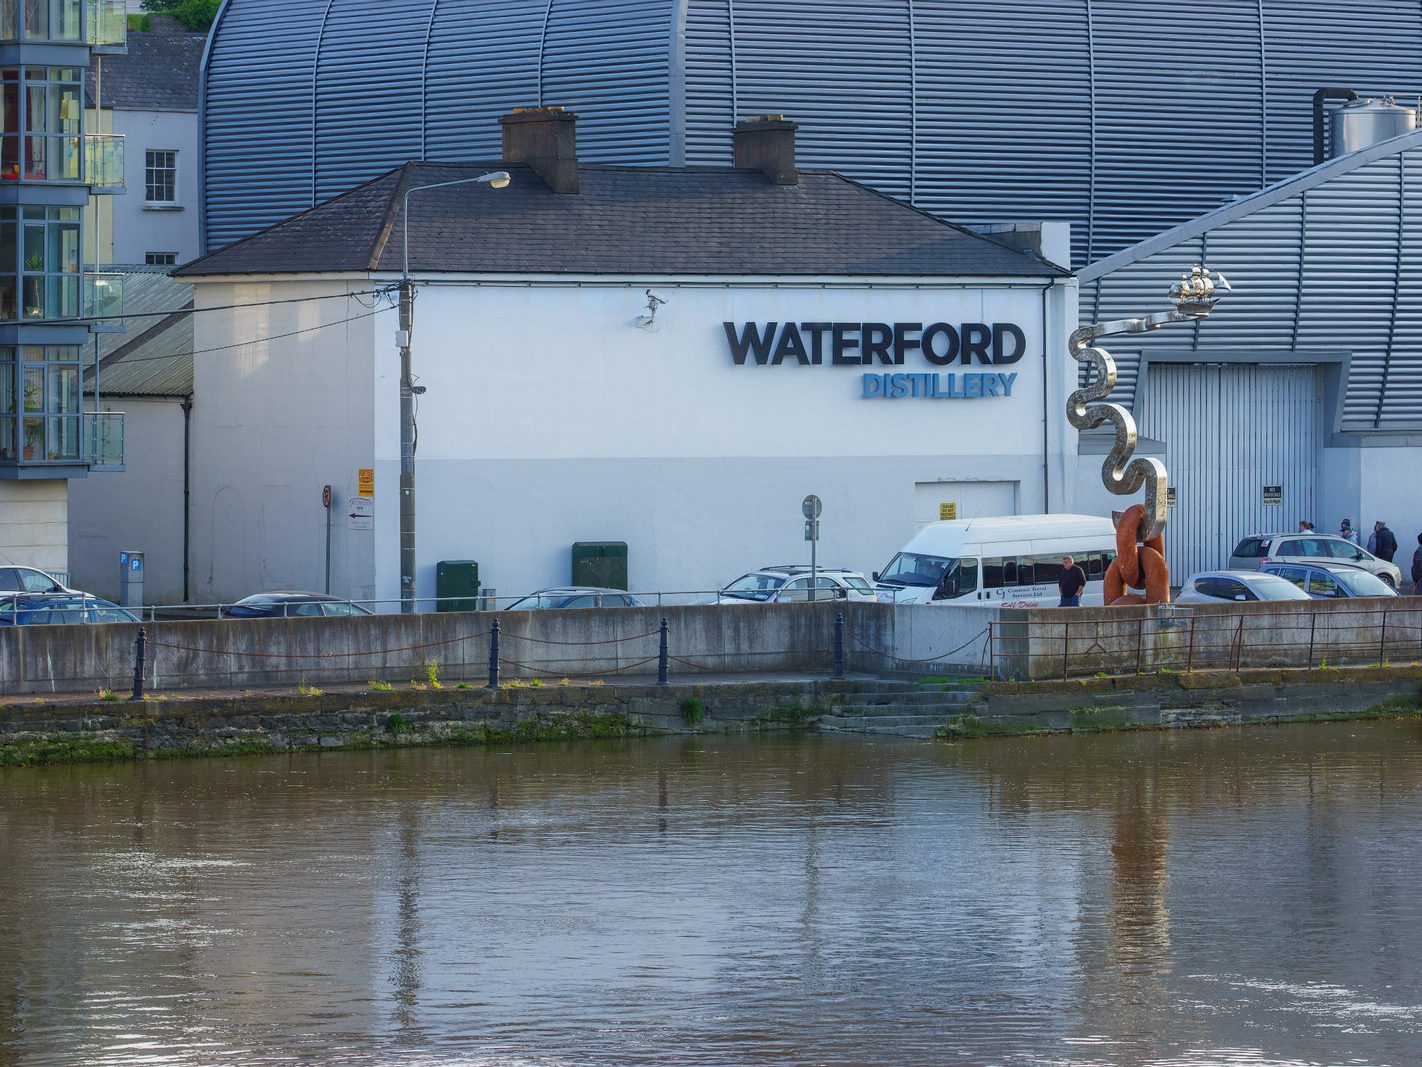 WATERFORD DISTILLERY PHOTOGRAPHED MAY 2016 PRODUCTION BEGAN IN JANUARY 001